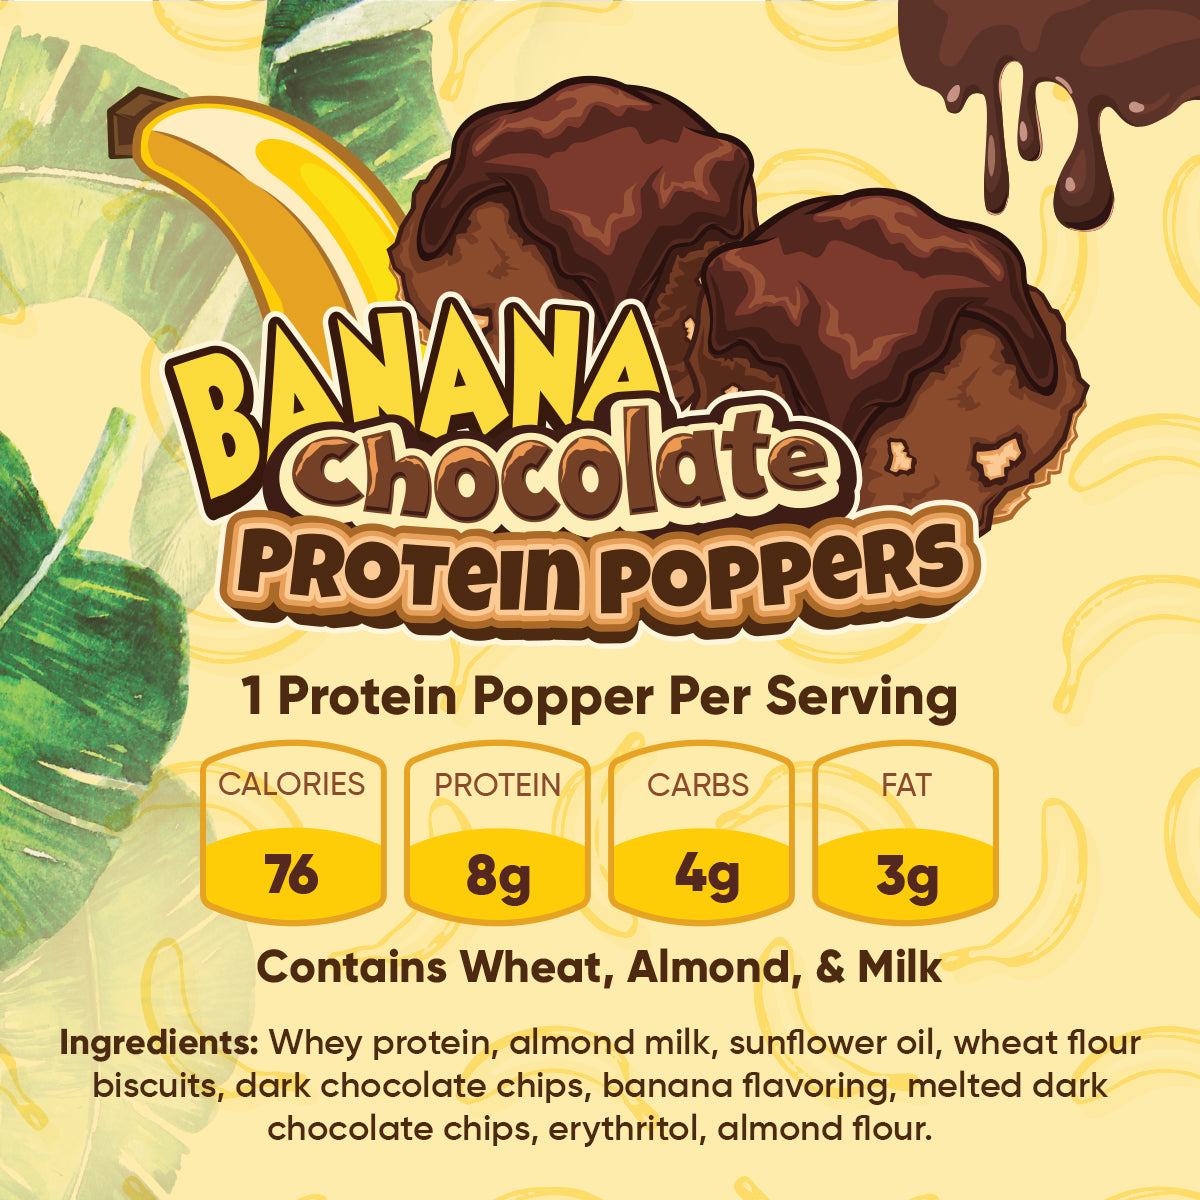 banana chocolate protein poppers nutrition facts